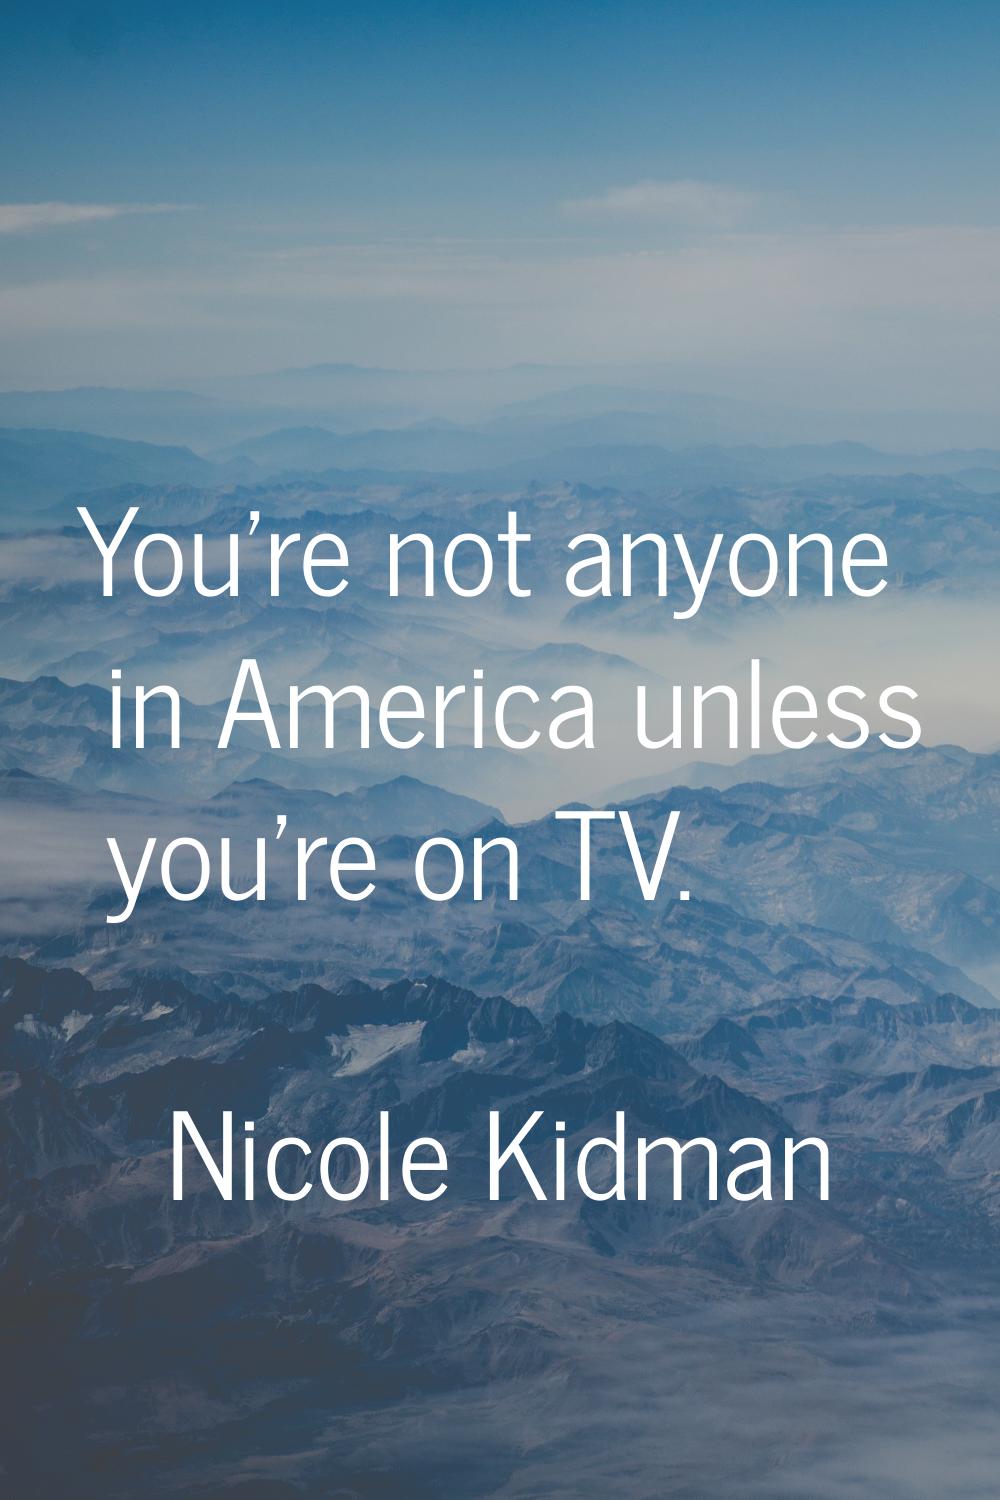 You're not anyone in America unless you're on TV.